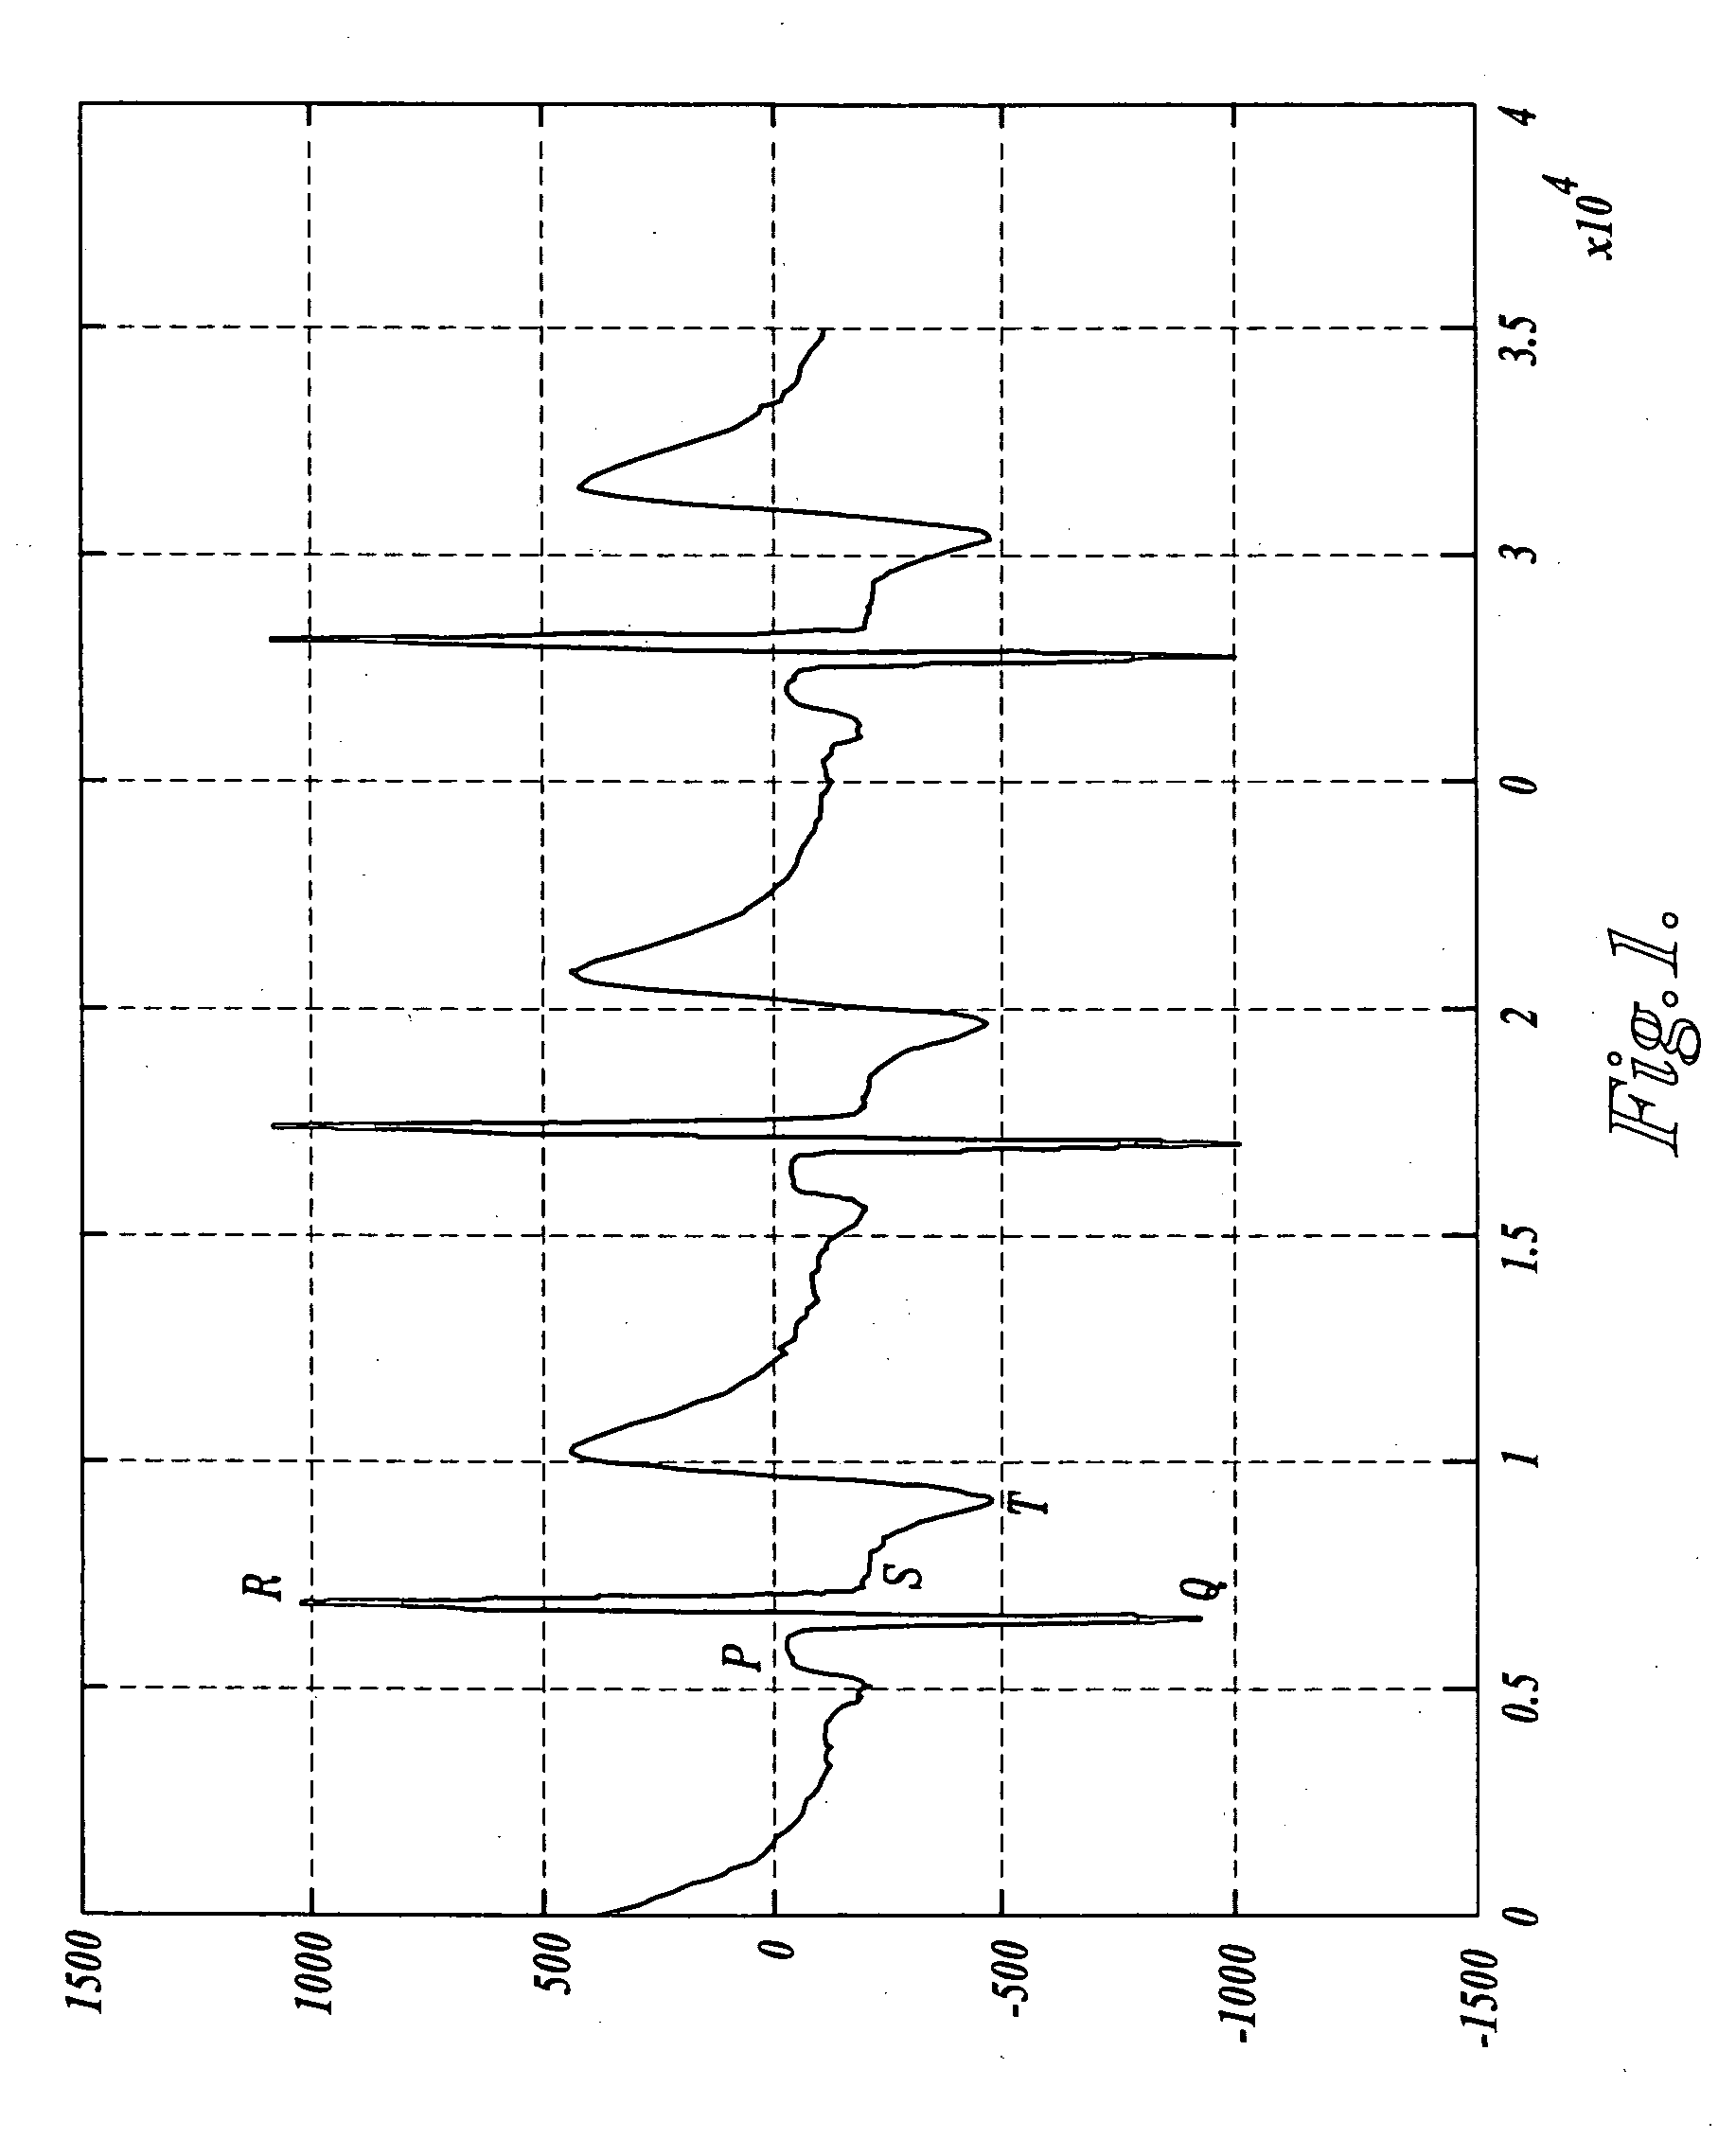 Apparatus, software, and methods for cardiac pulse detection using a piezoelectric sensor